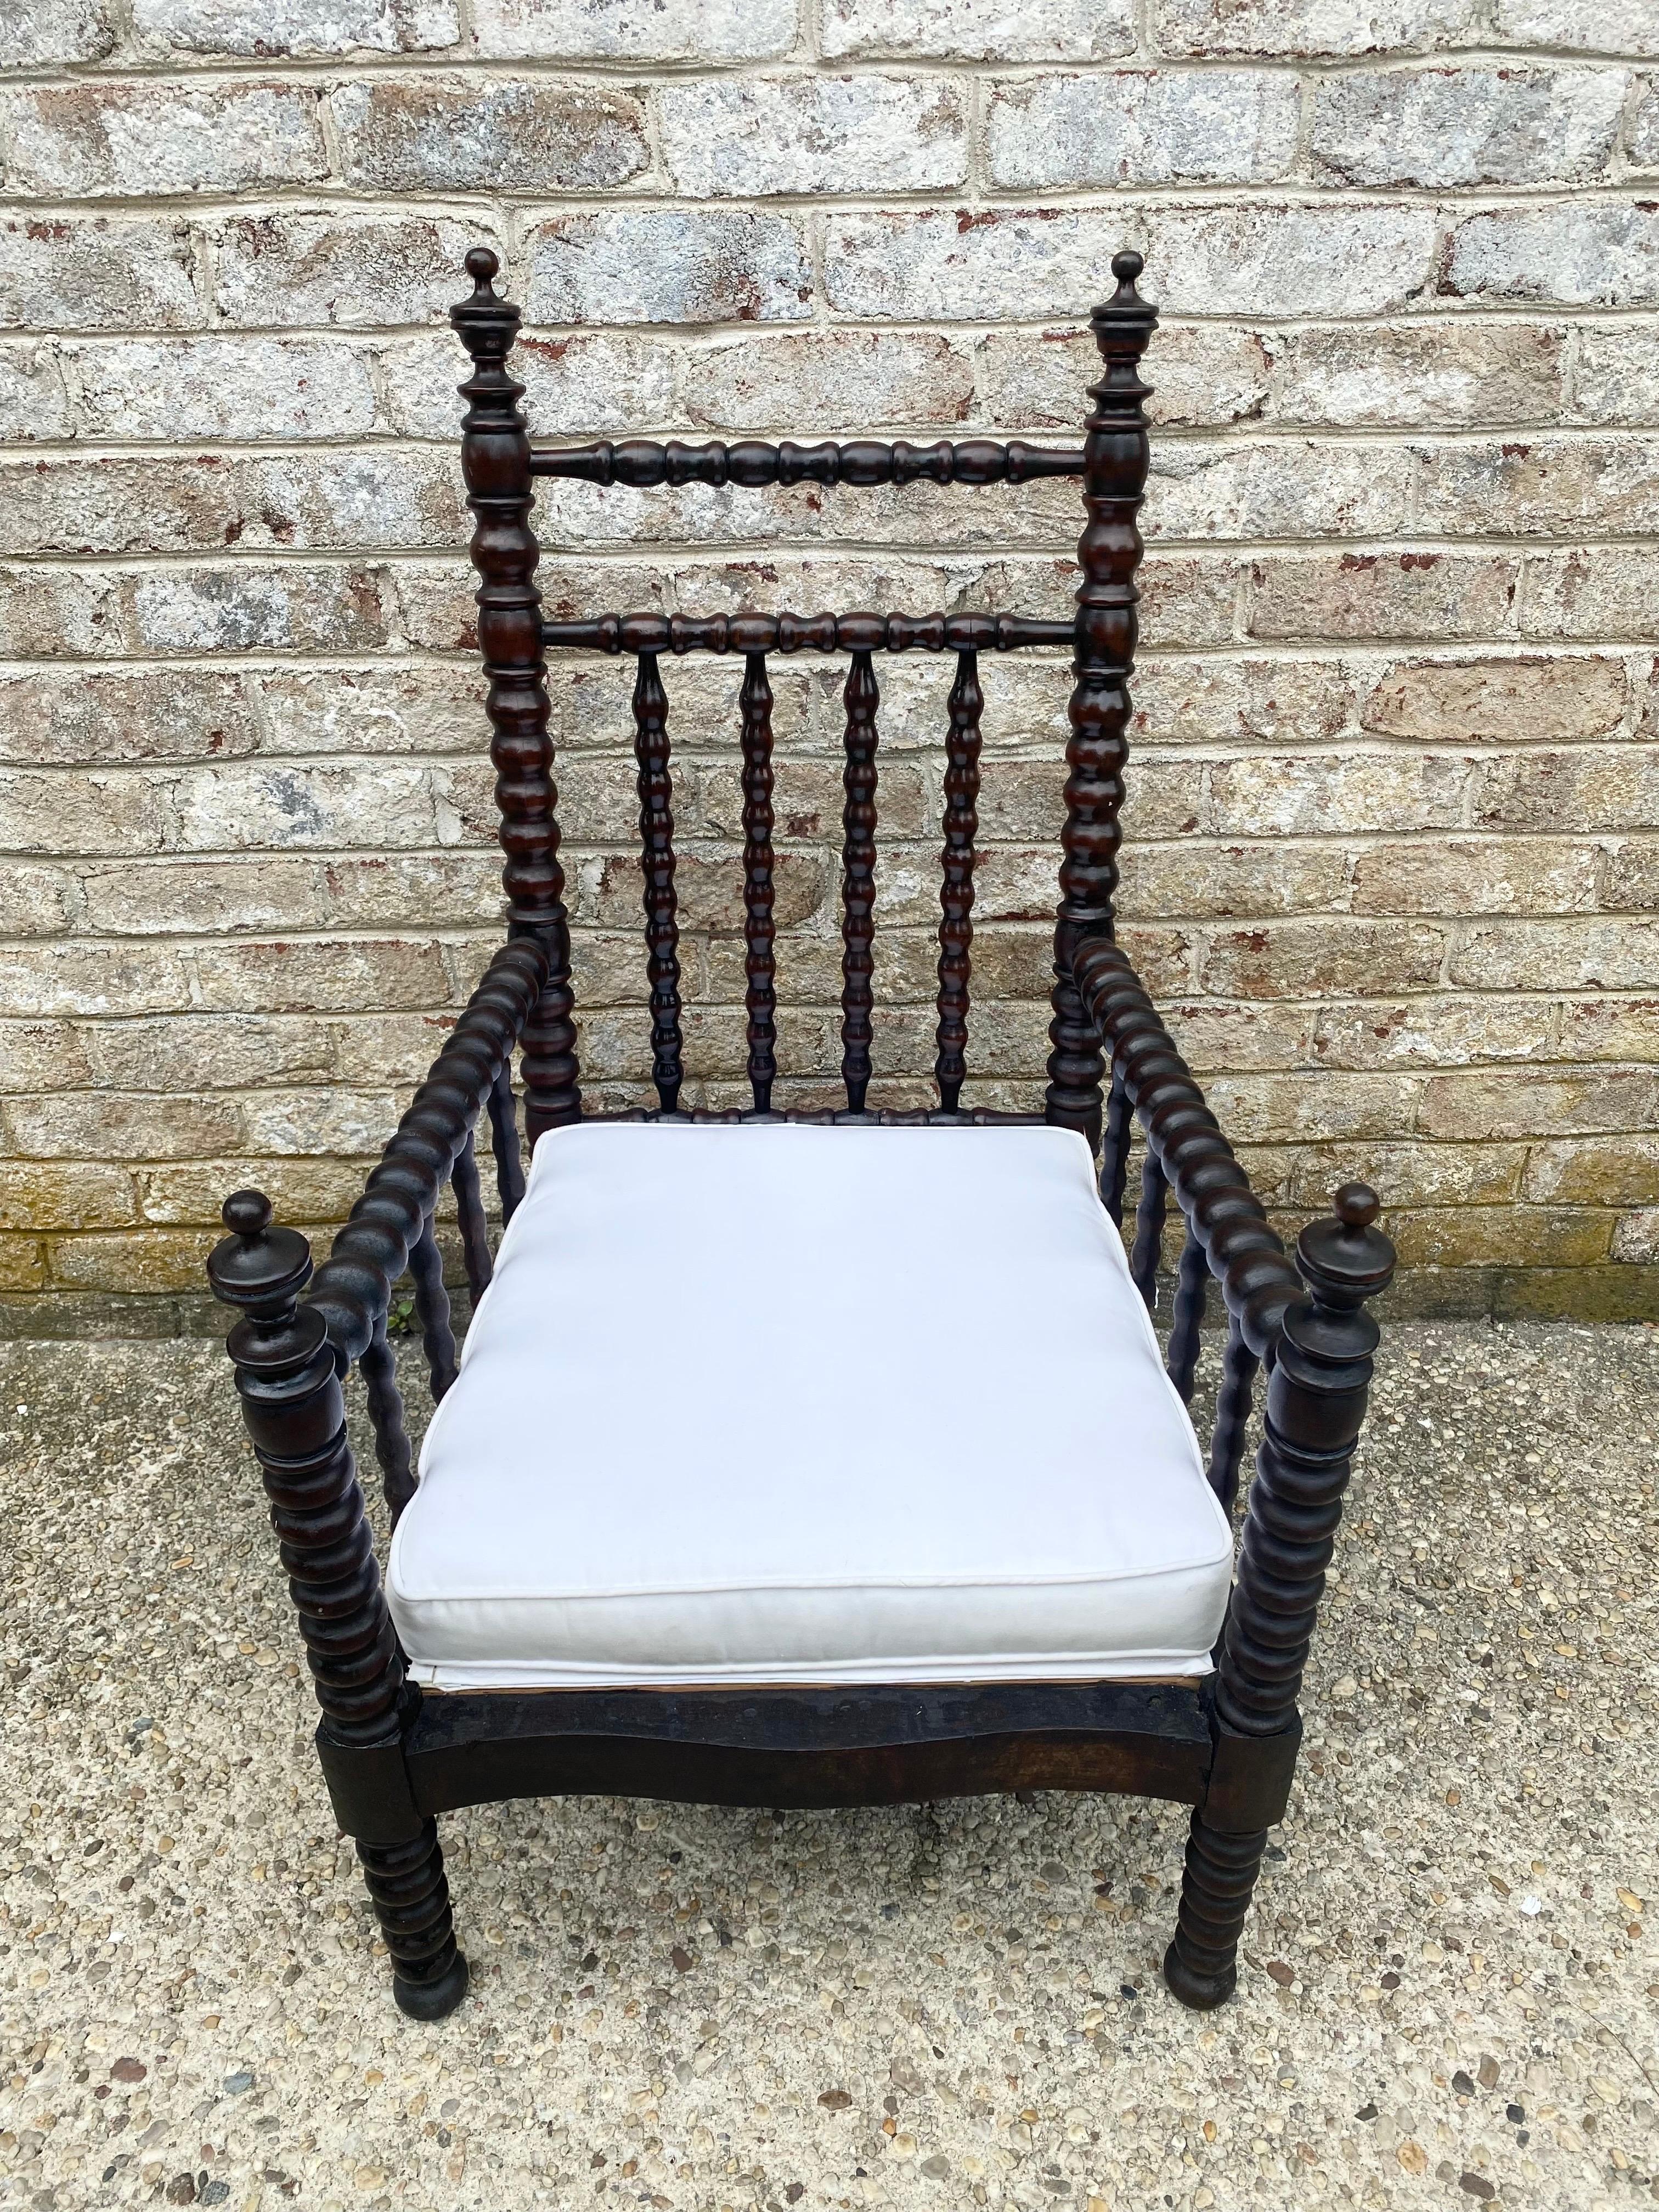 Antique bobbin/turned wood armchair.
Dimensions are as follows: 
Height 40